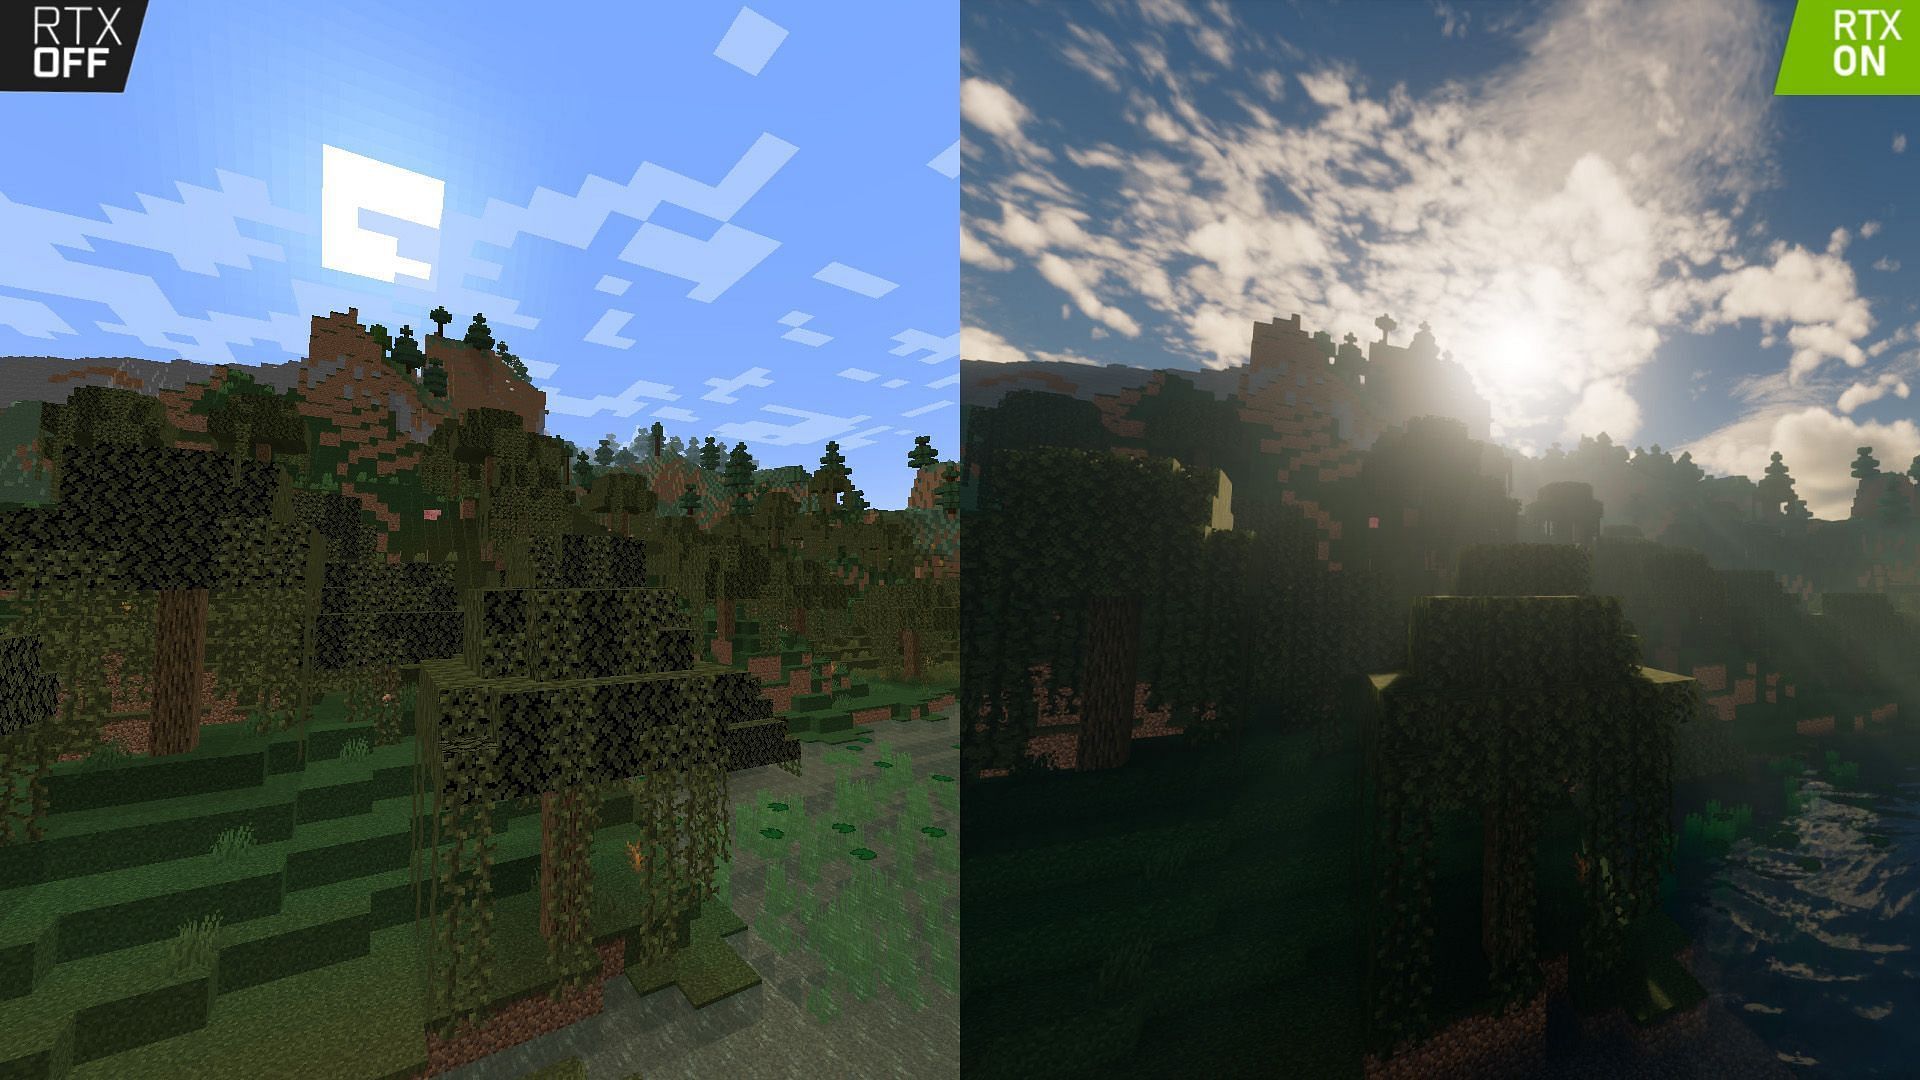 Experience Ray tracing effects in Minecraft Java Edition (Image via Mojang)